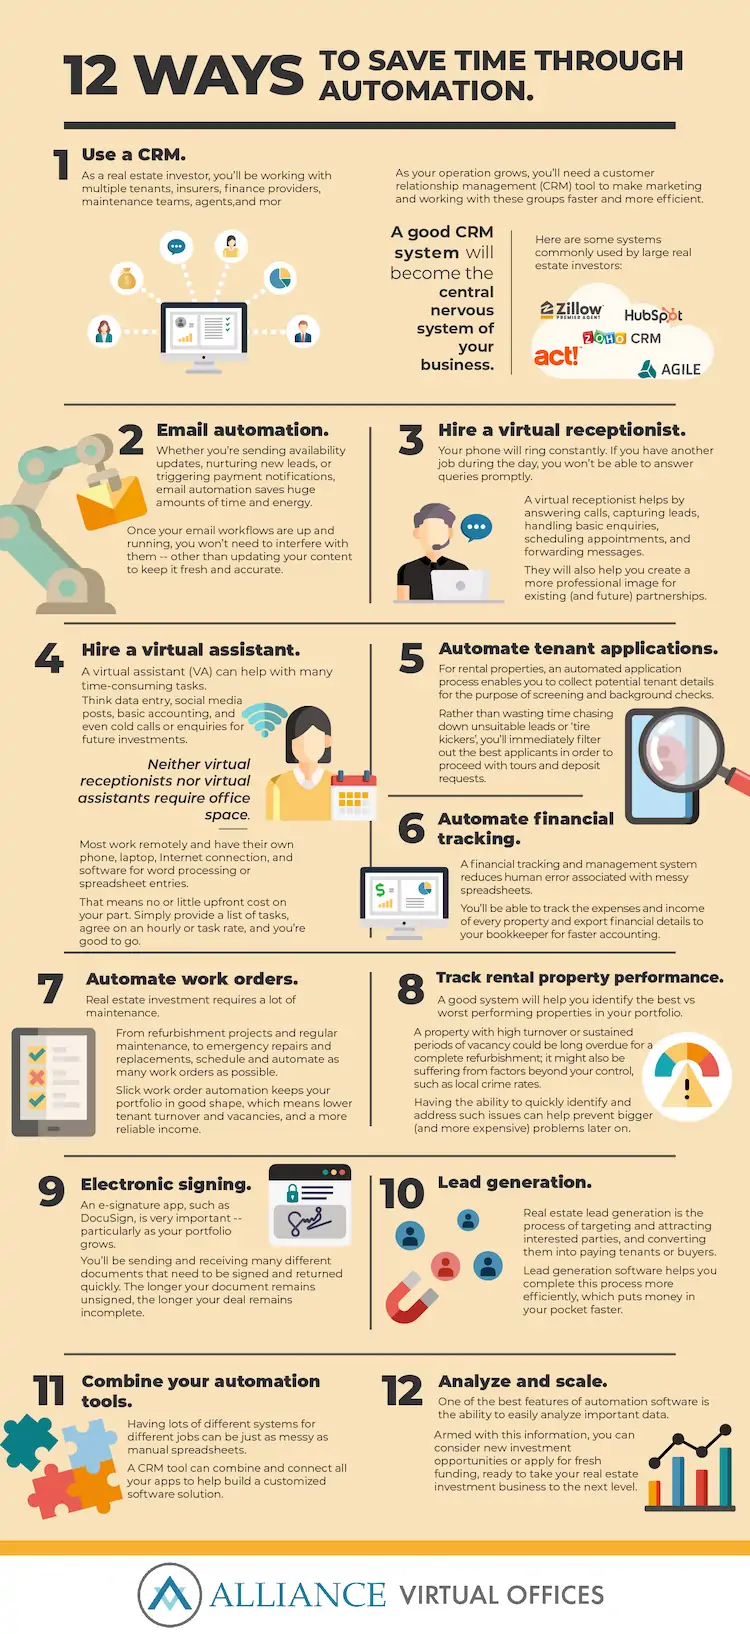 12 ways to save time through automation - infographic